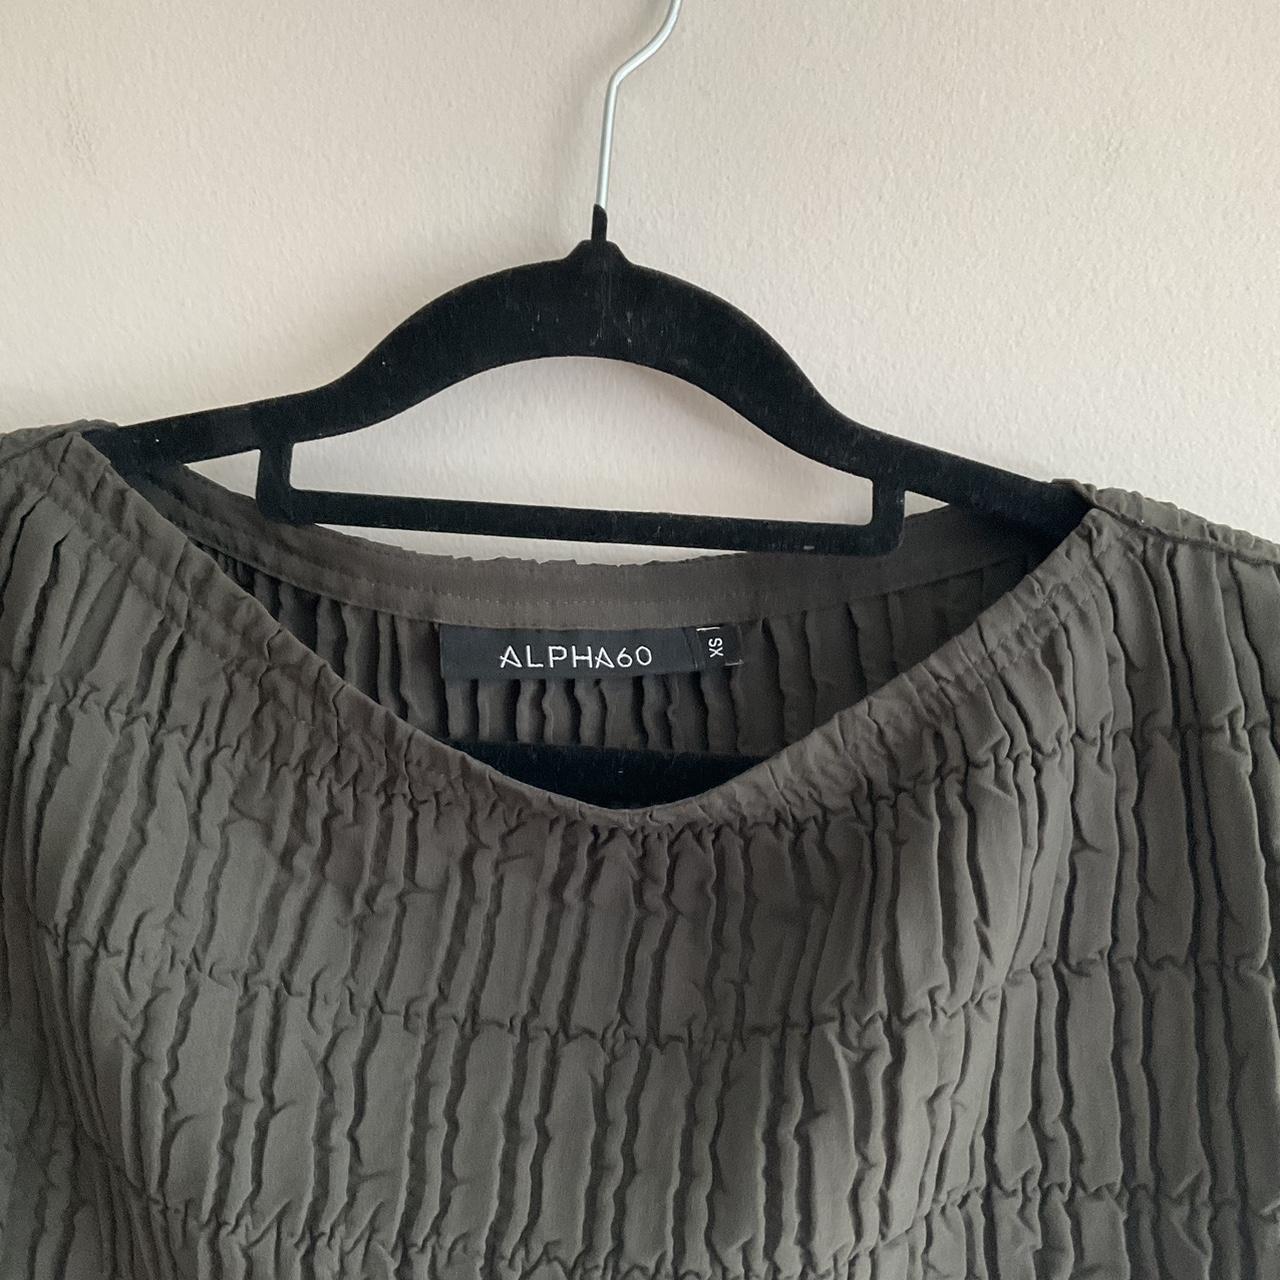 Alpha 60 scrunched PES top in khaki green! Worn, but... - Depop